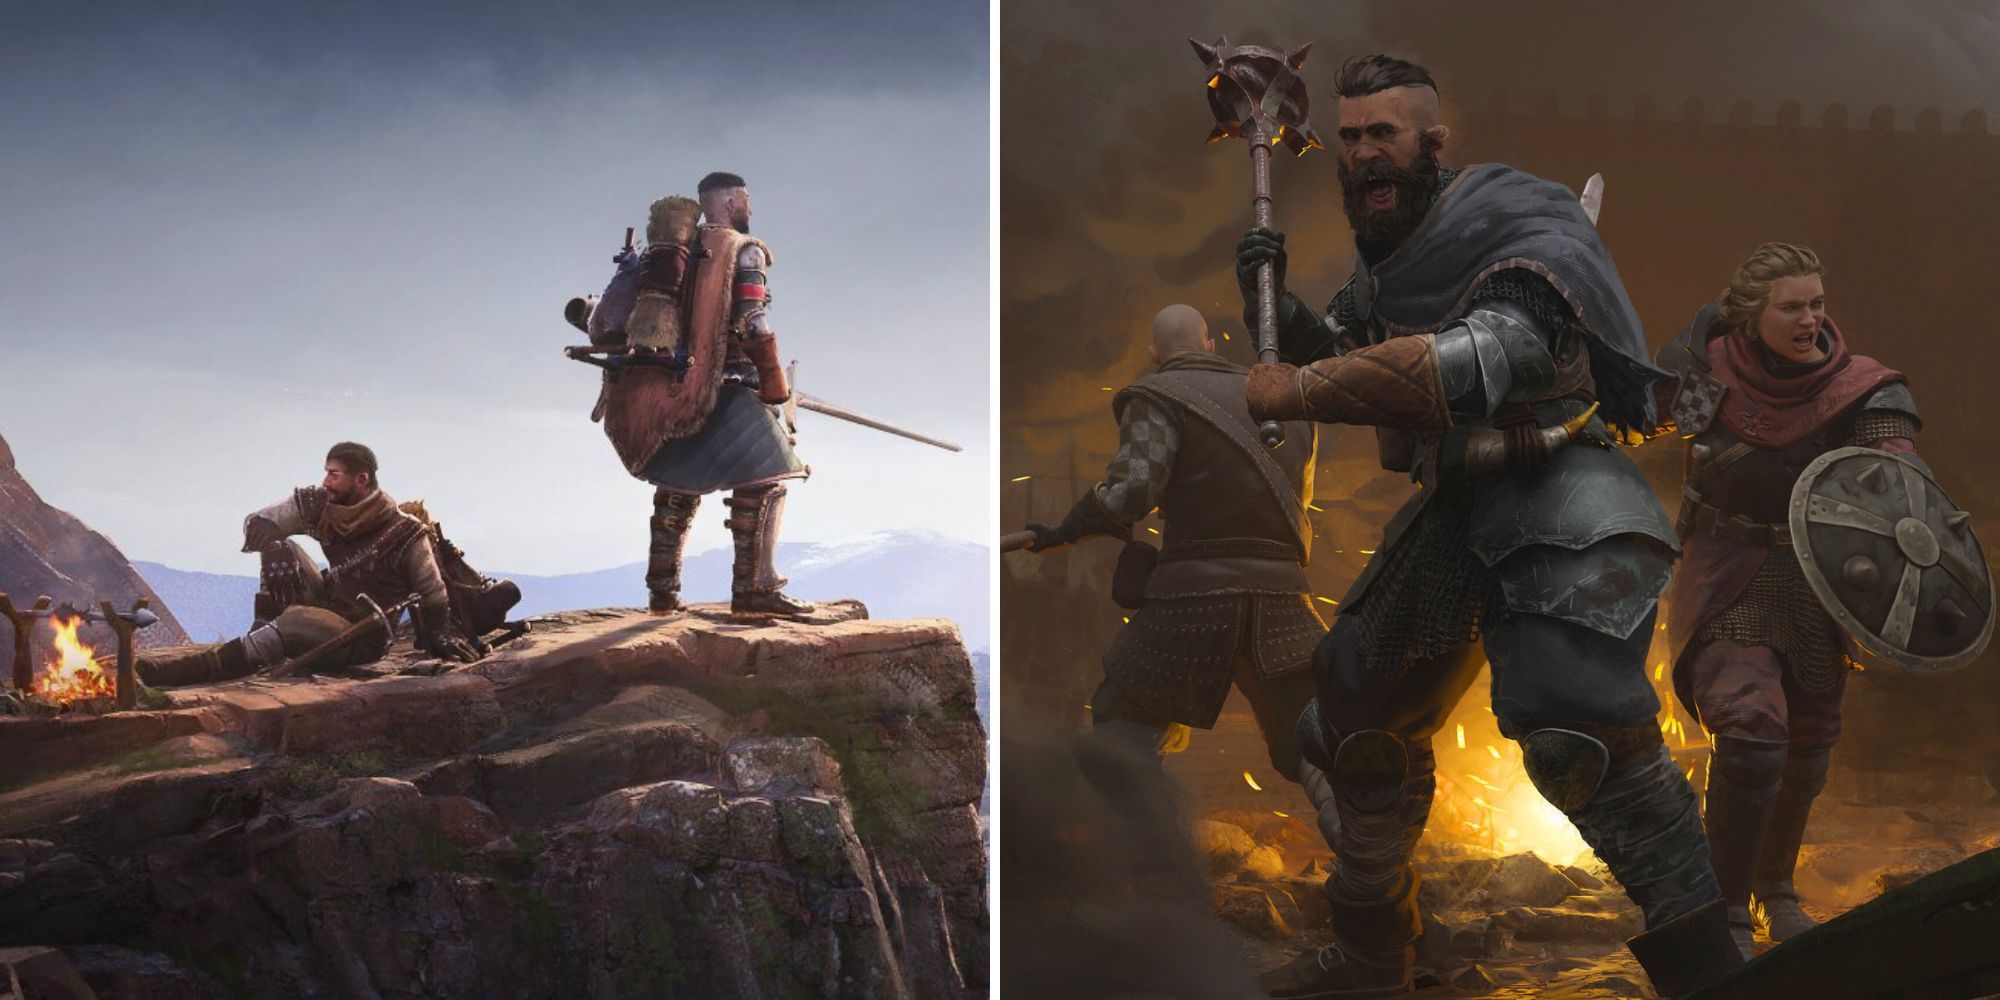 Collage image of a character standing on cliff and characters preparing for battle in Wartales.